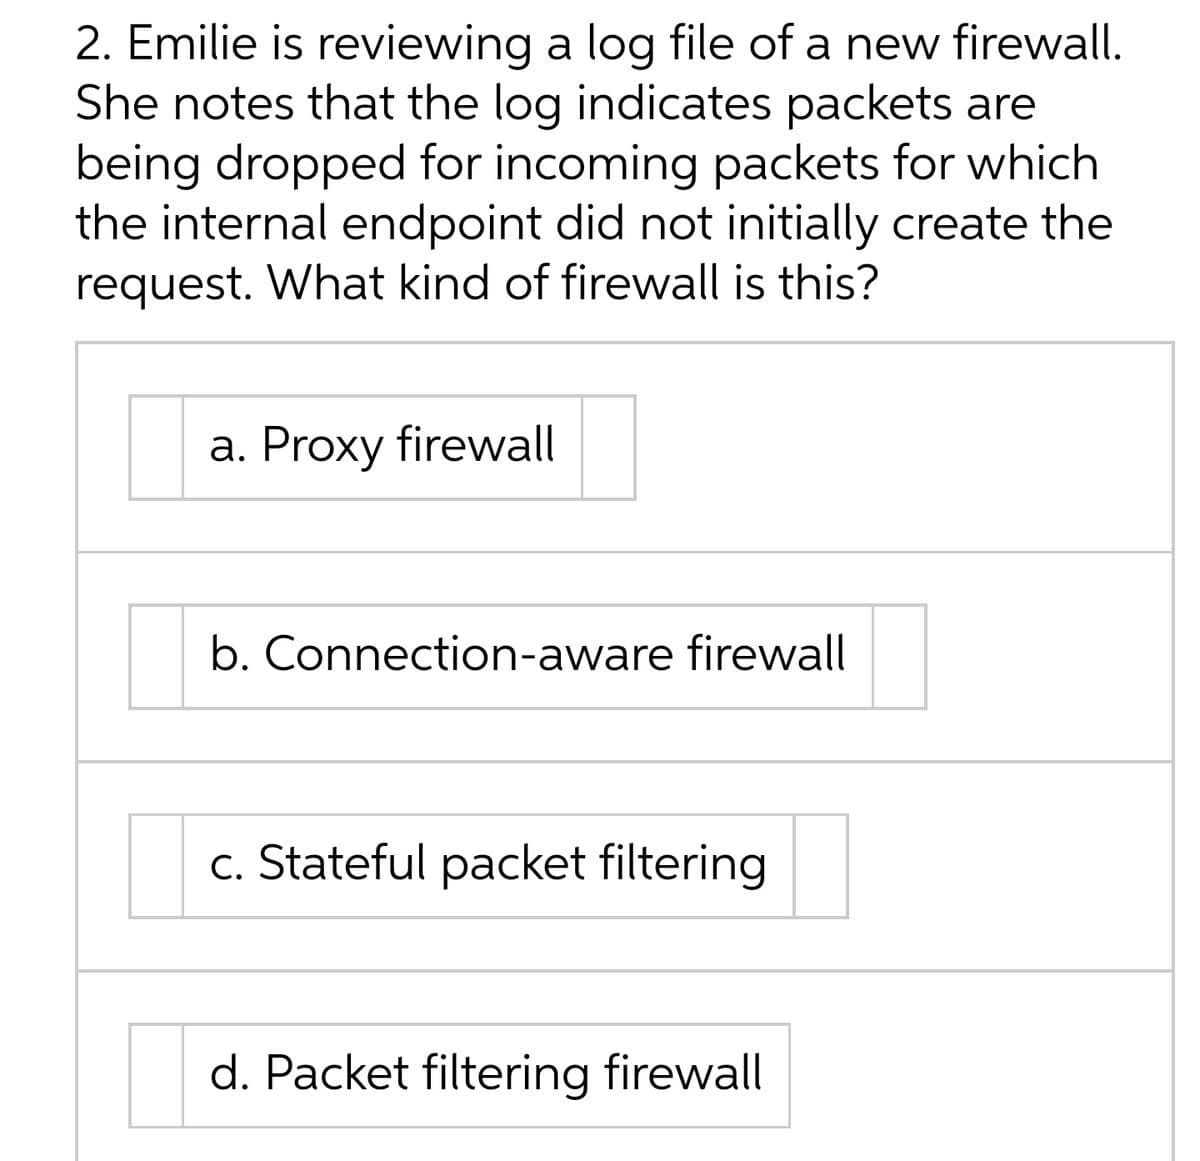 2. Emilie is reviewing a log file of a new firewall.
She notes that the log indicates packets are
being dropped for incoming packets for which
the internal endpoint did not initially create the
request. What kind of firewall is this?
a. Proxy firewall
b. Connection-aware firewall
c. Stateful packet filtering
d. Packet filtering firewall
